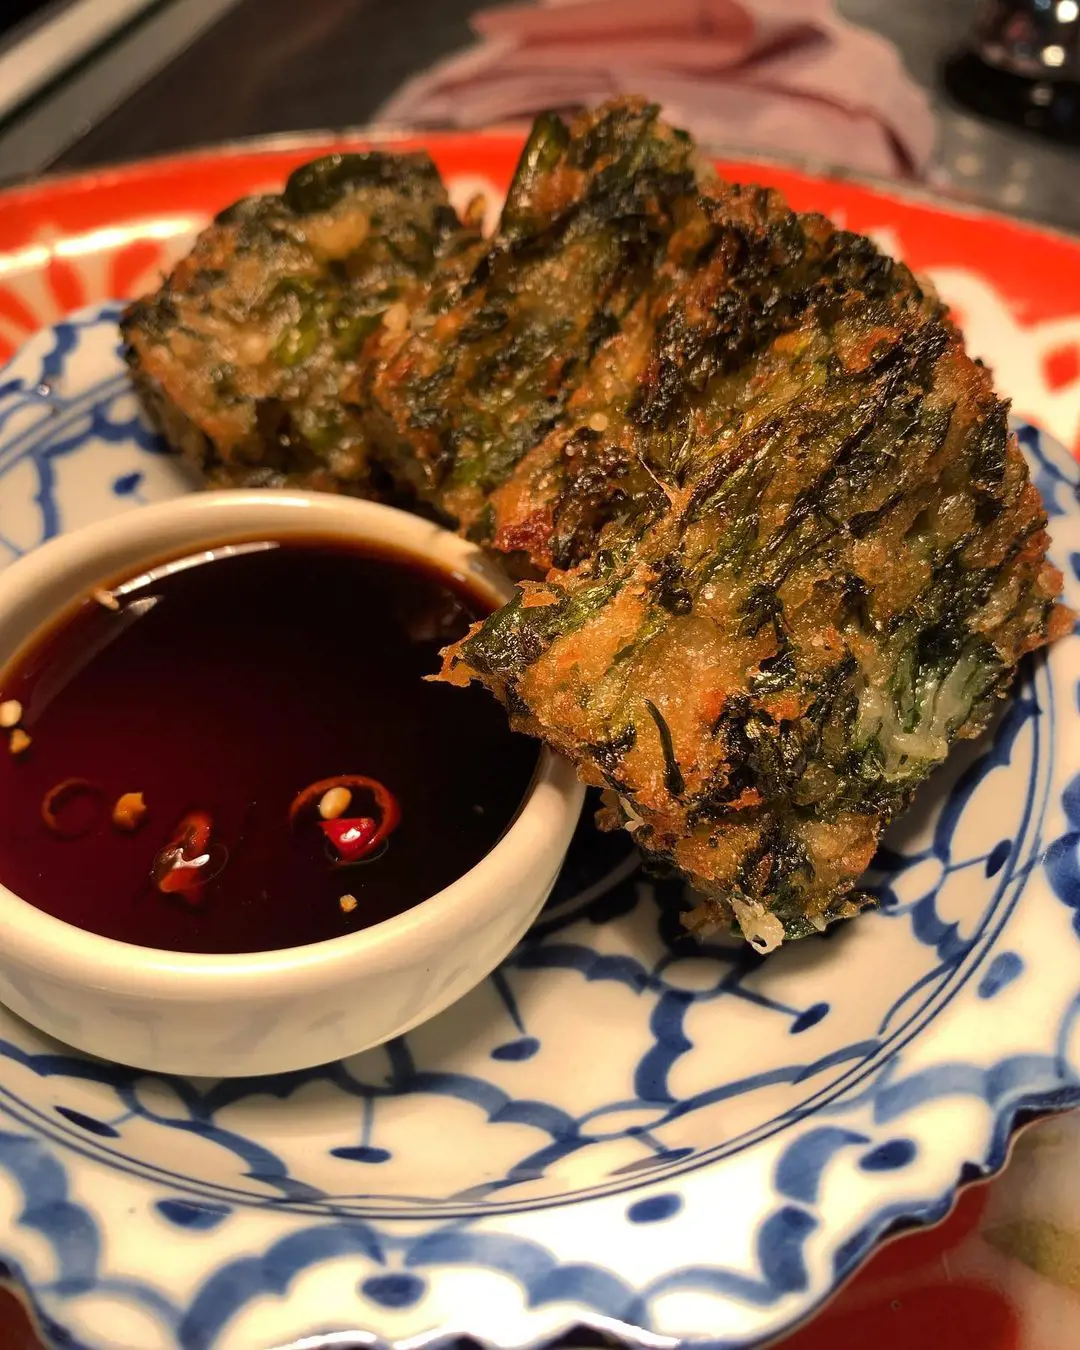 Chive cakes, steamed and fried with a sweet soy dipping sauce